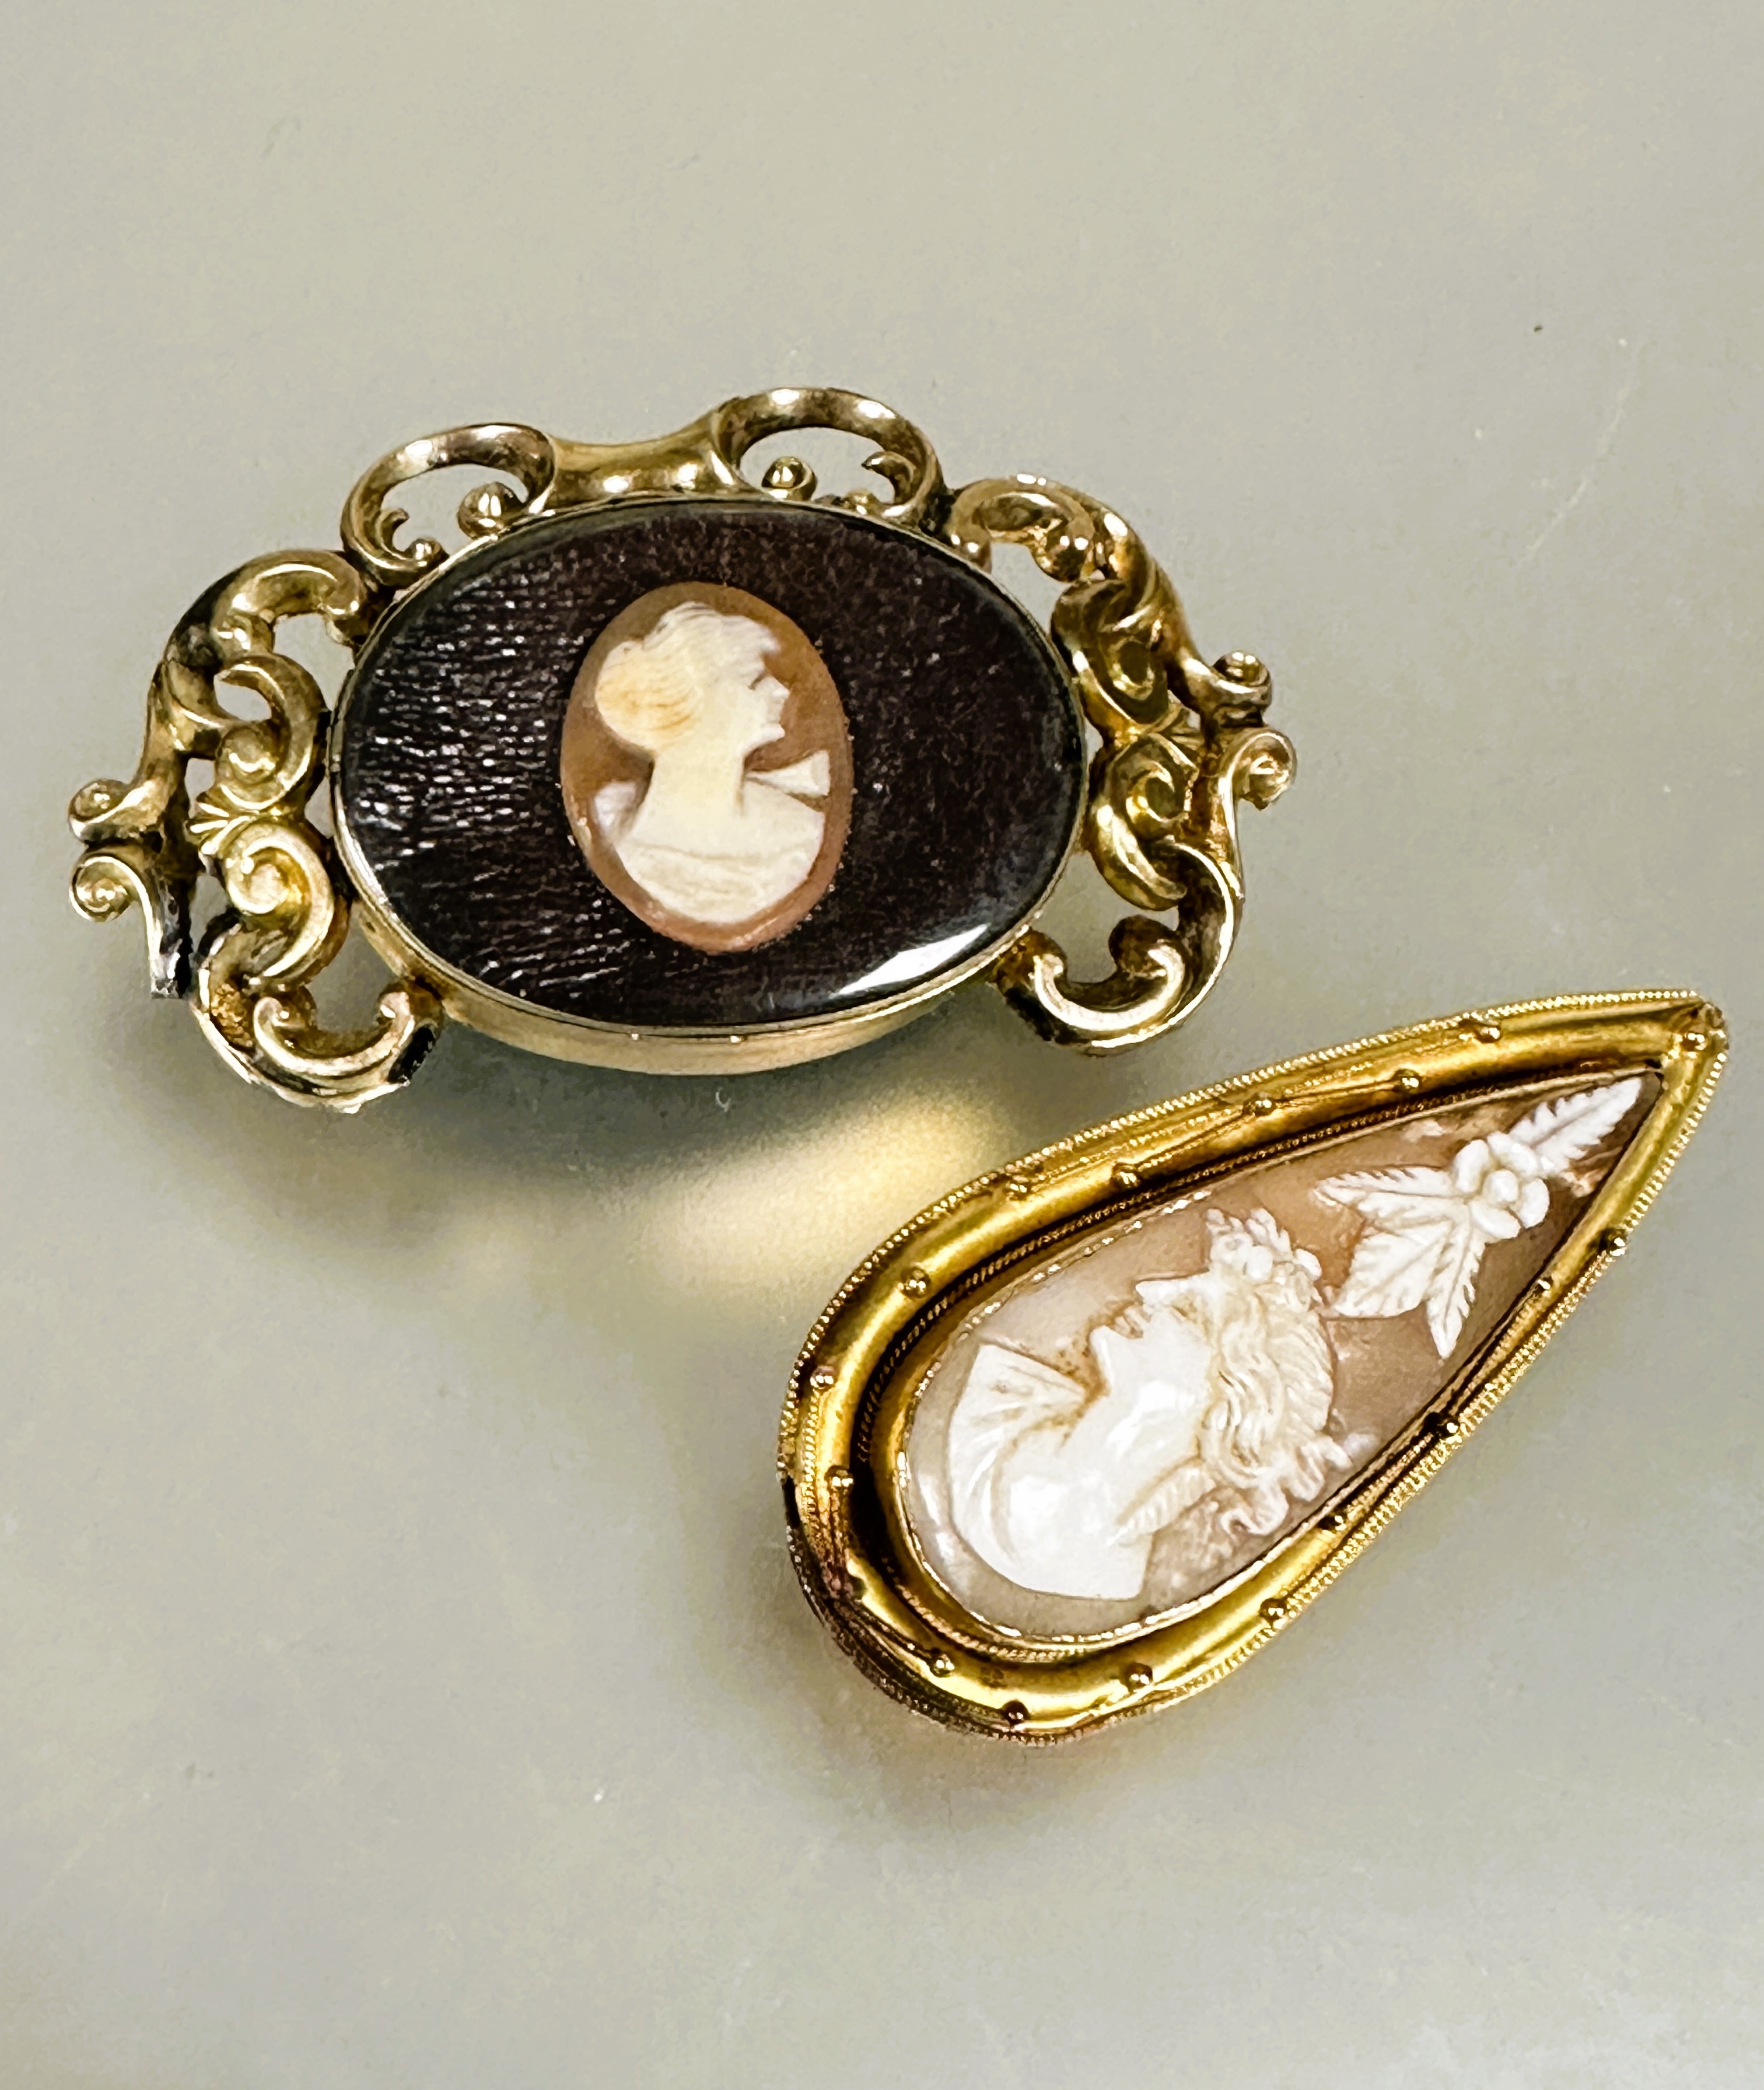 A Late Victorian yellow metal tear drop brooch mounted shell carved cameo panel depicting a female